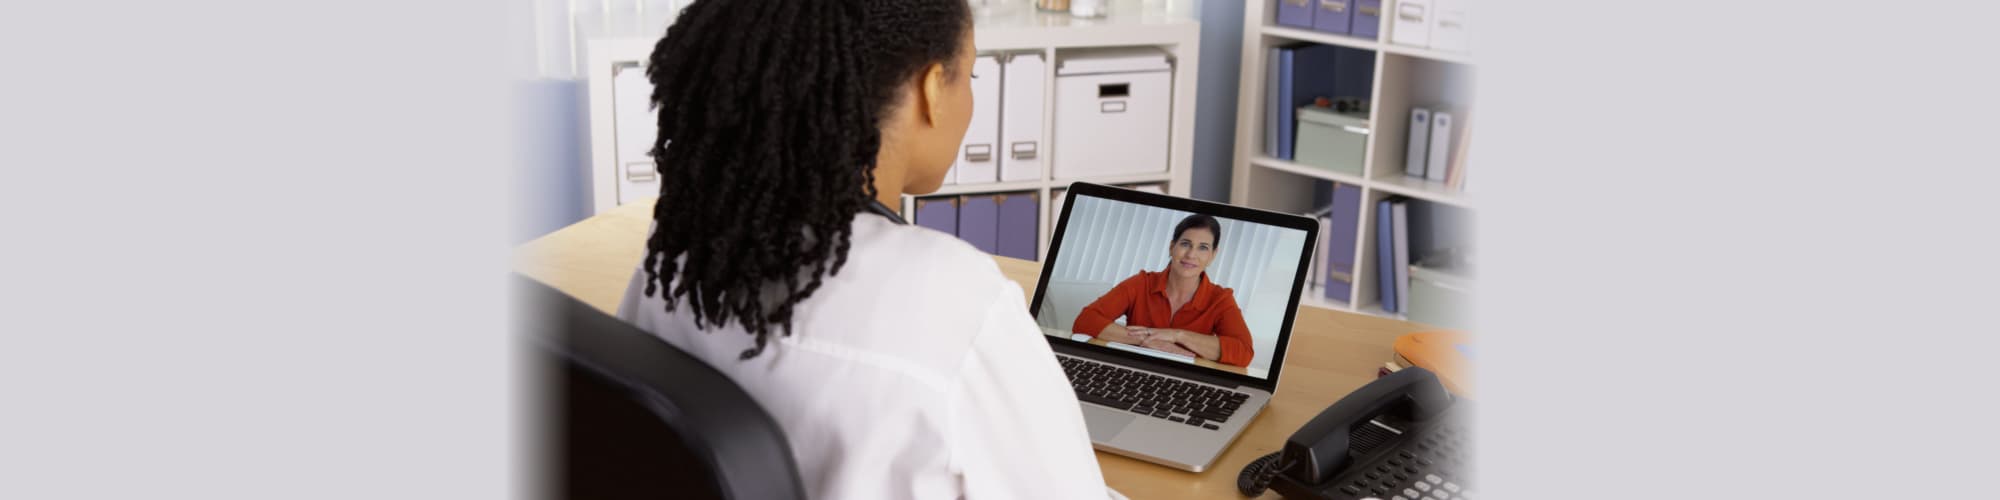 Female patient talking to African American doctor over video chat